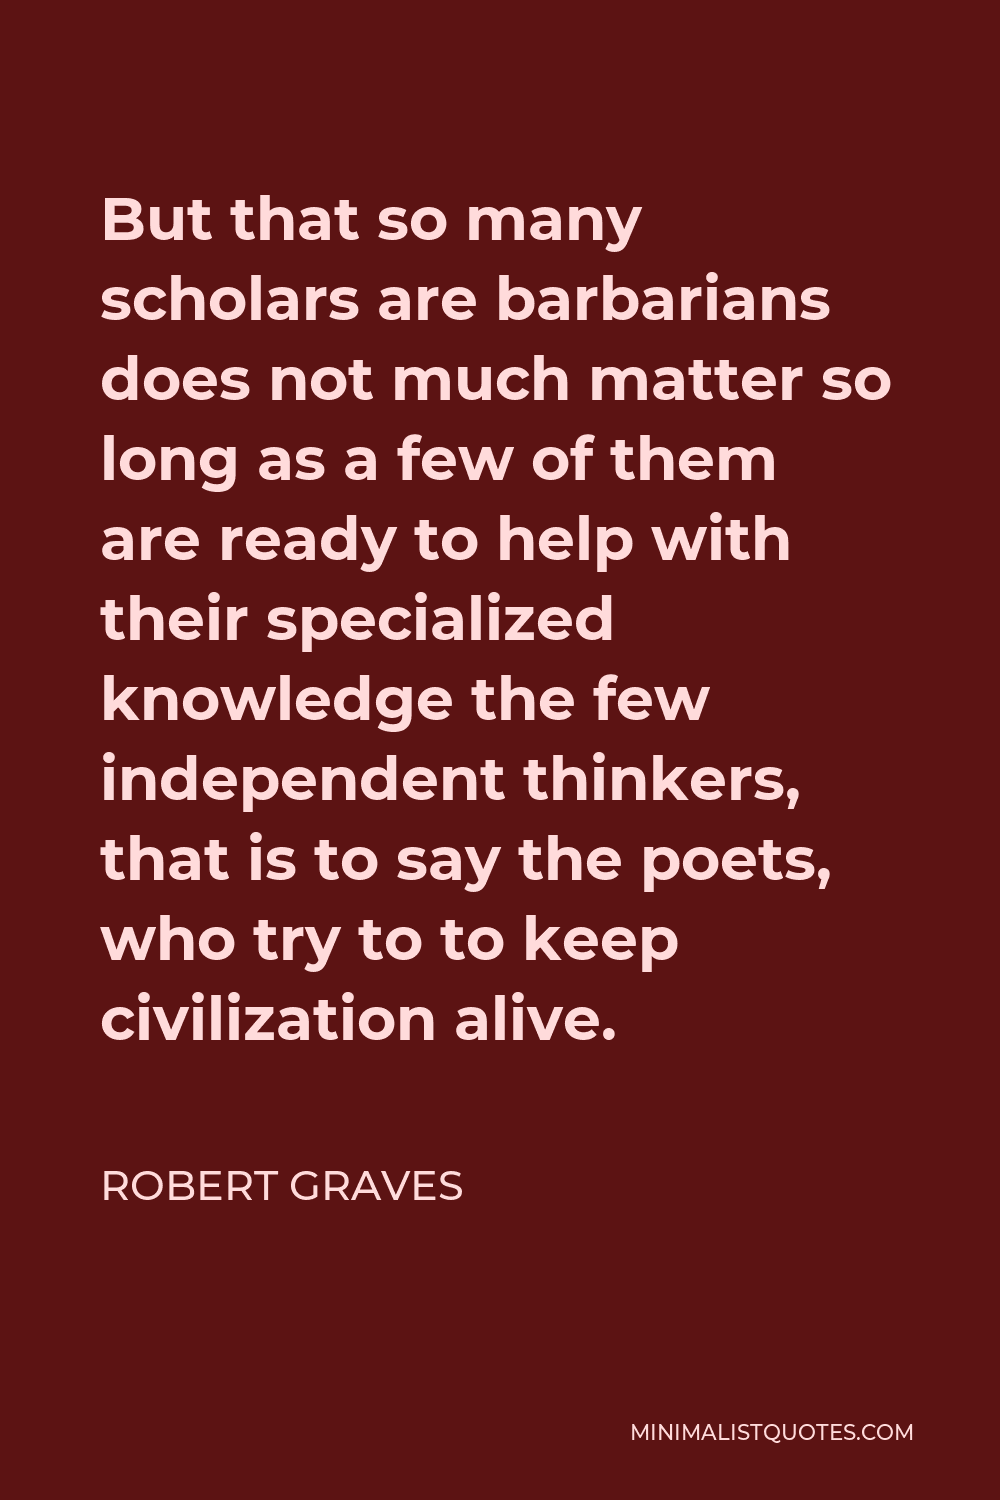 Robert Graves Quote - But that so many scholars are barbarians does not much matter so long as a few of them are ready to help with their specialized knowledge the few independent thinkers, that is to say the poets, who try to to keep civilization alive.